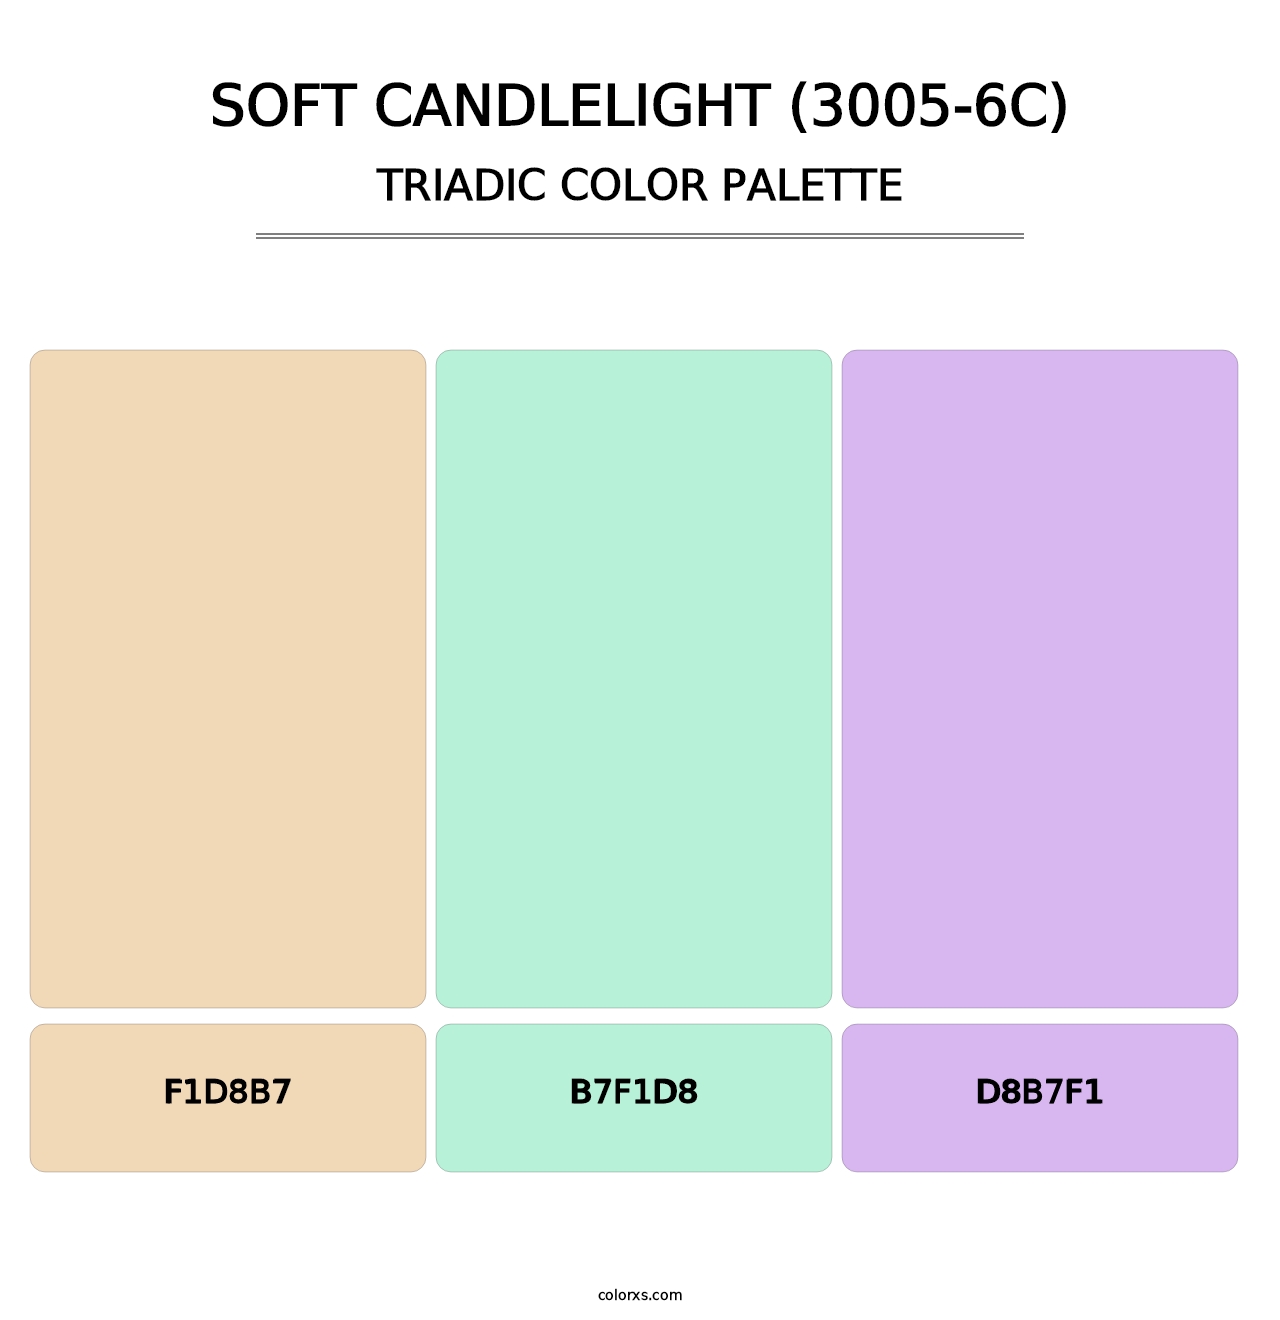 Soft Candlelight (3005-6C) - Triadic Color Palette